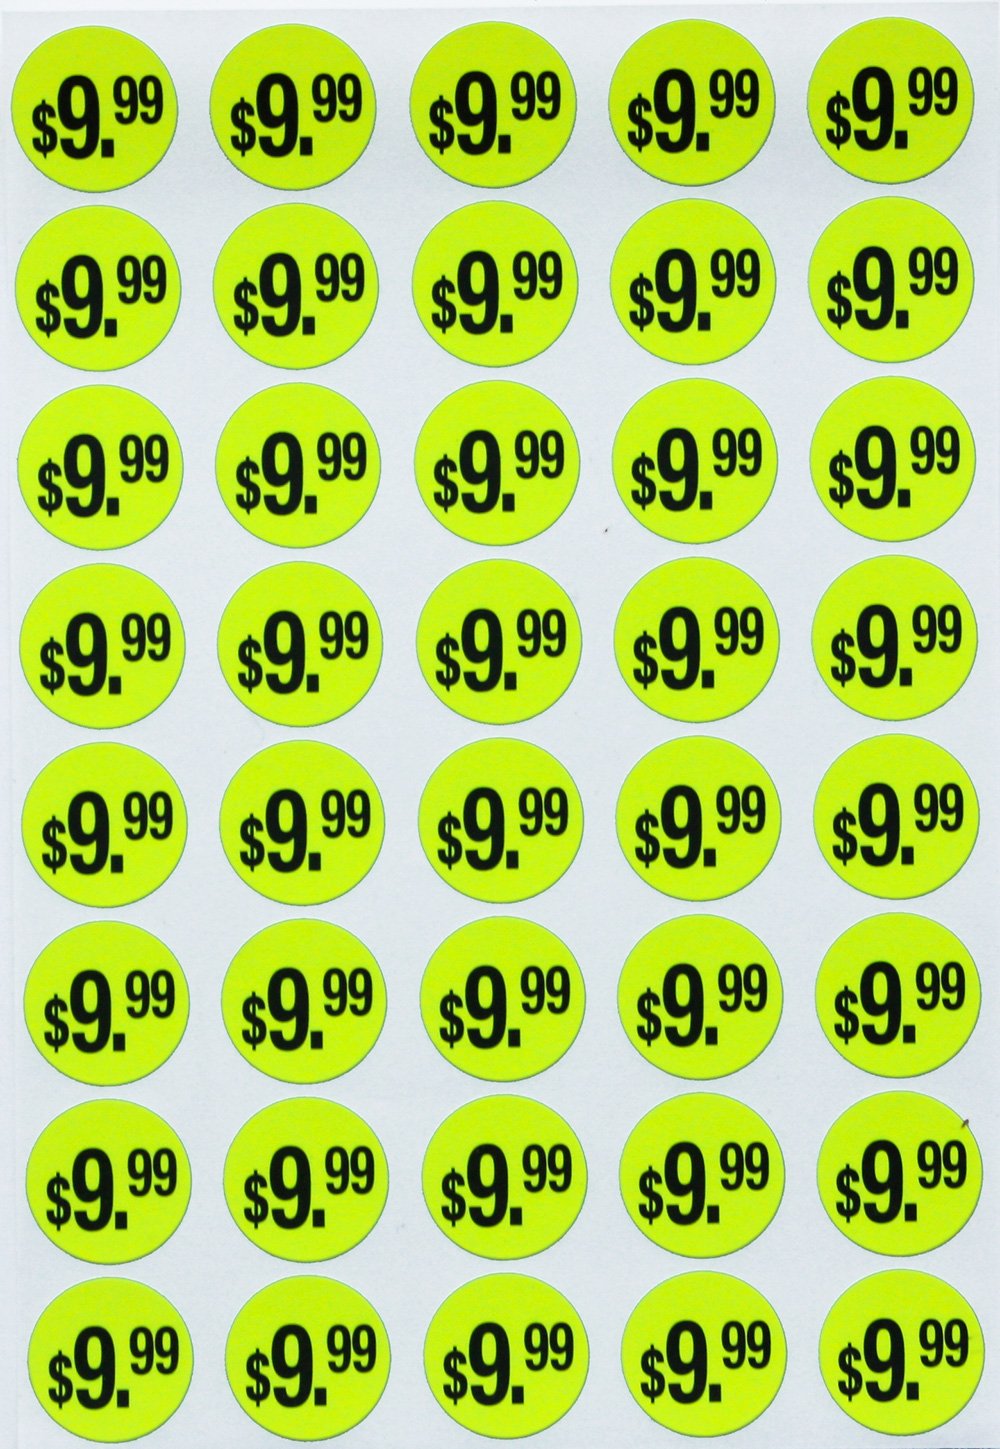 Price Stickers - Various Shapes, Sizes, & Colors - InStock Labels